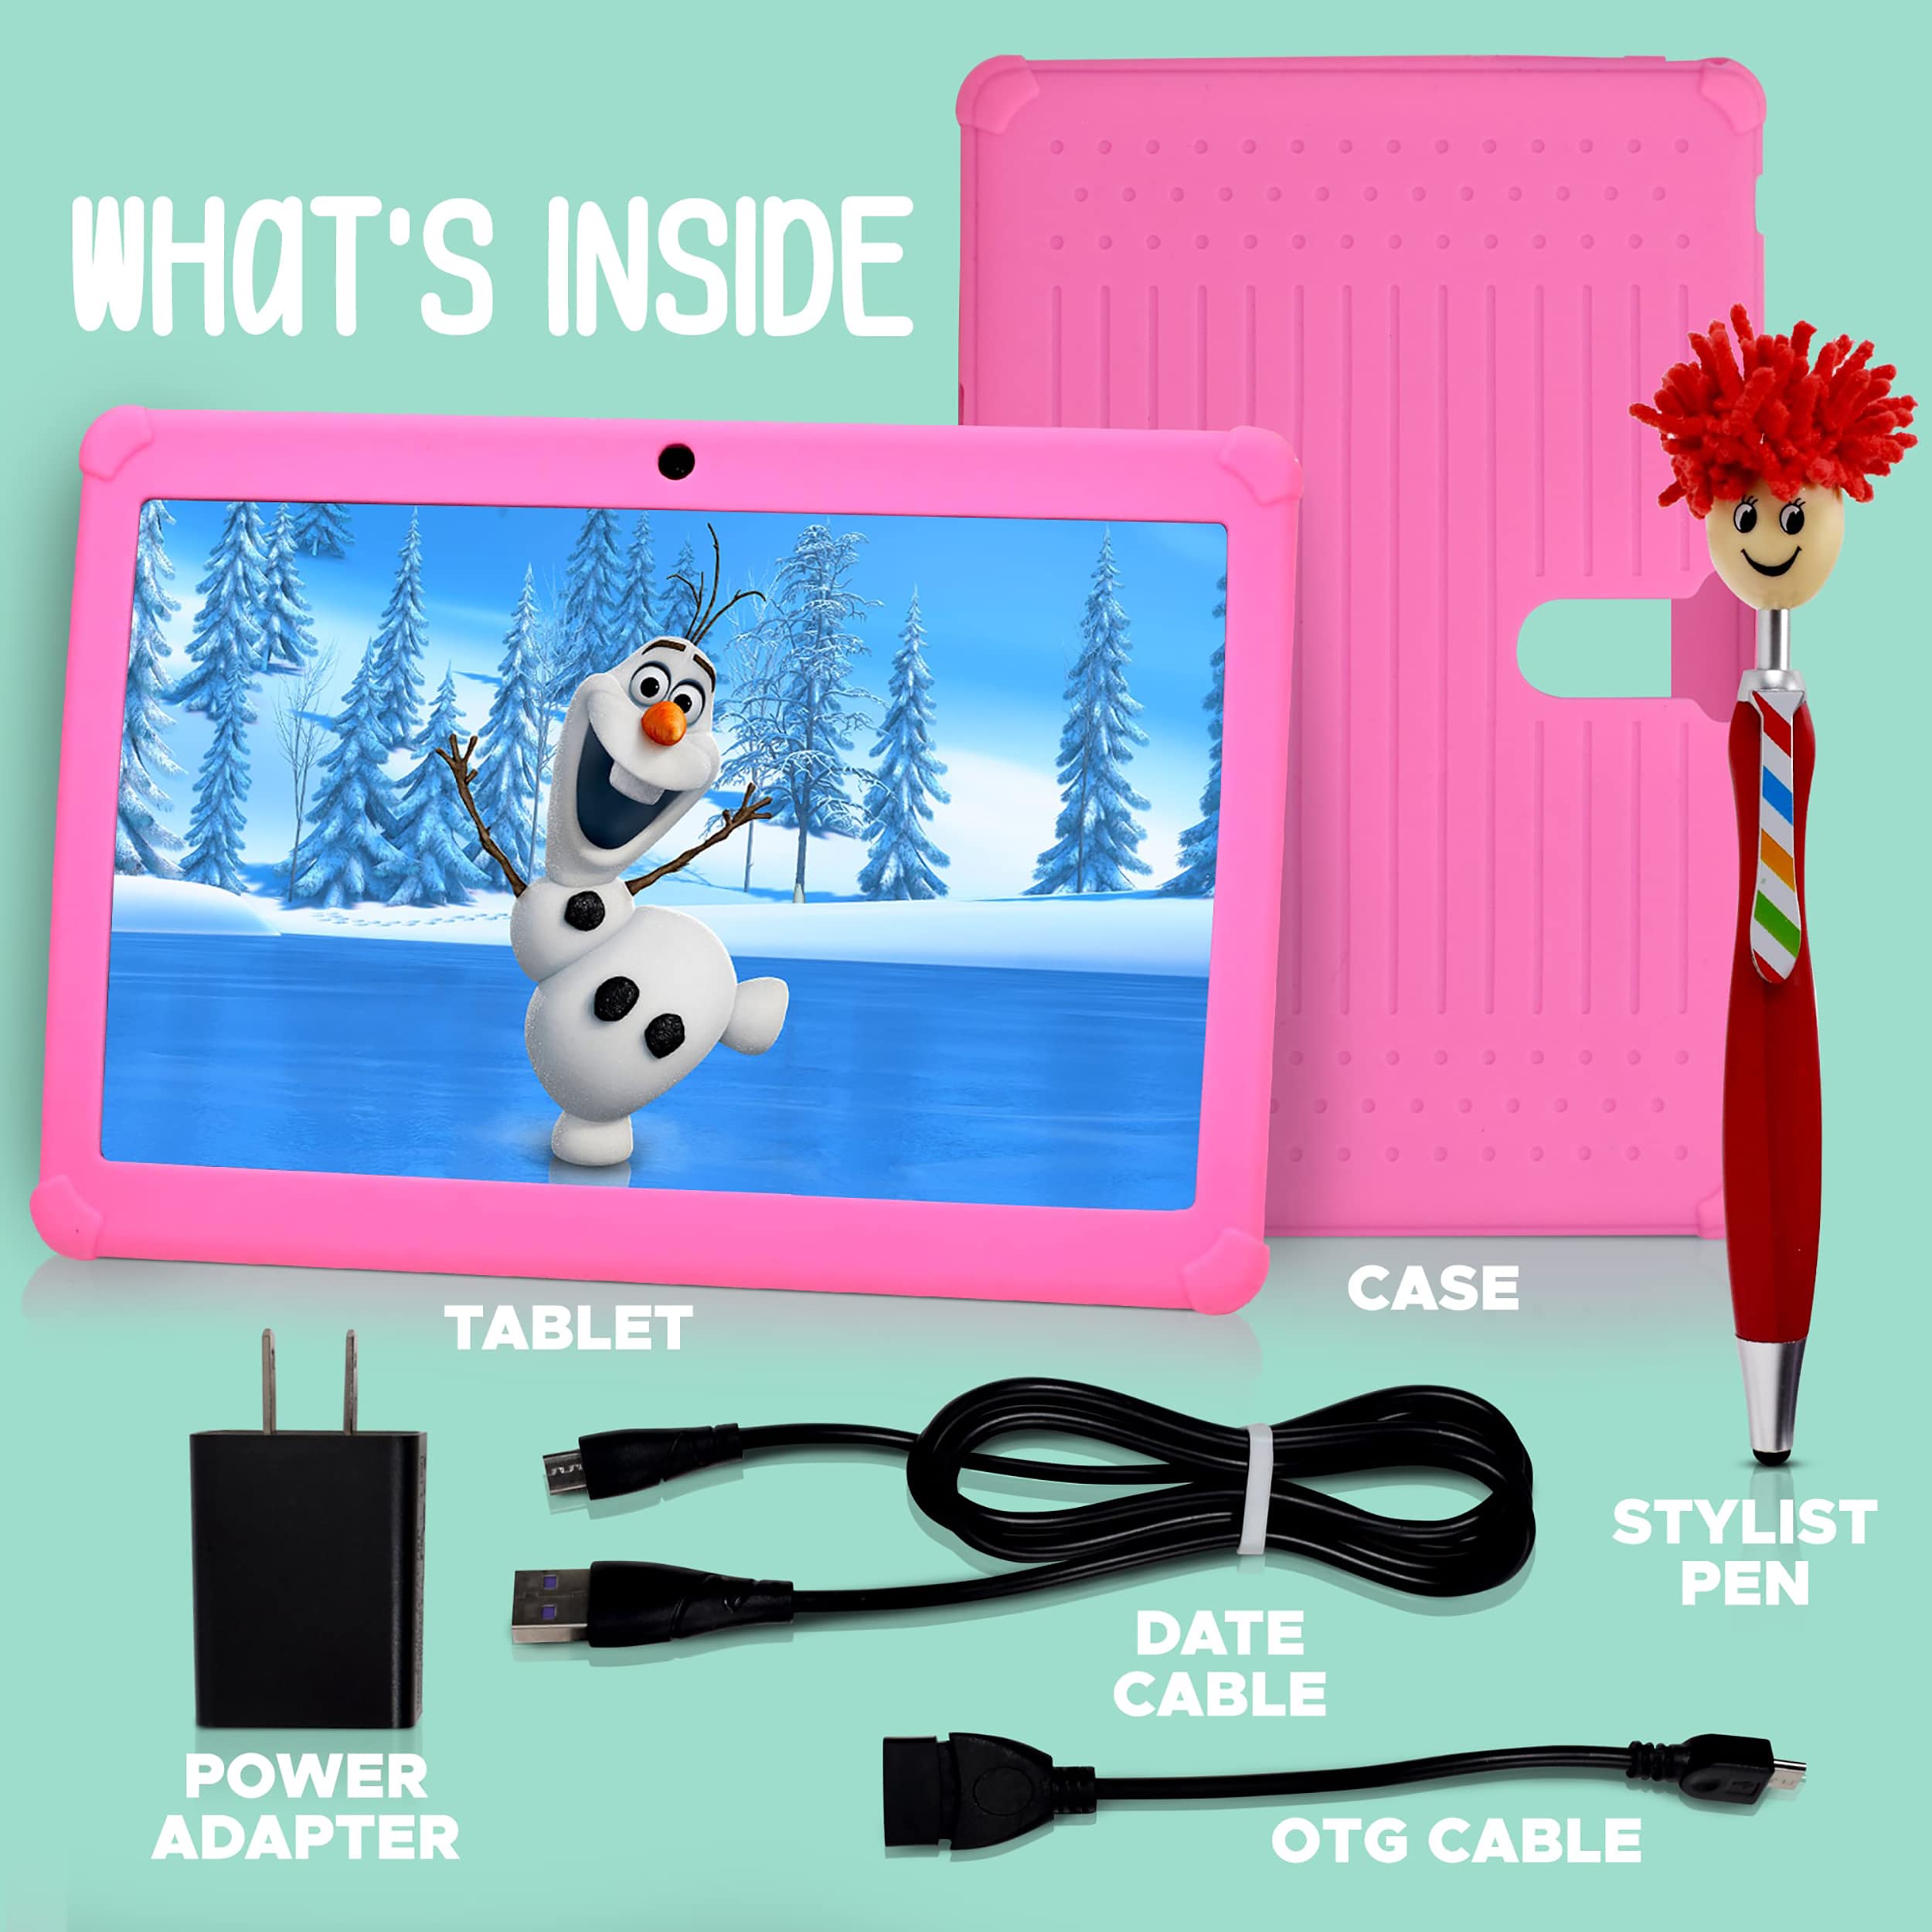 Pyle 10.1-Inch Android Tablet w/ 1080p HD Display, Dual Camera, WiFi Compatibility, Quad-Core Processor,10.1” Kids Tablet w/Stylus Pen  1GB RAM, 8GB Storage, Kid-Proof Cover (Pink)